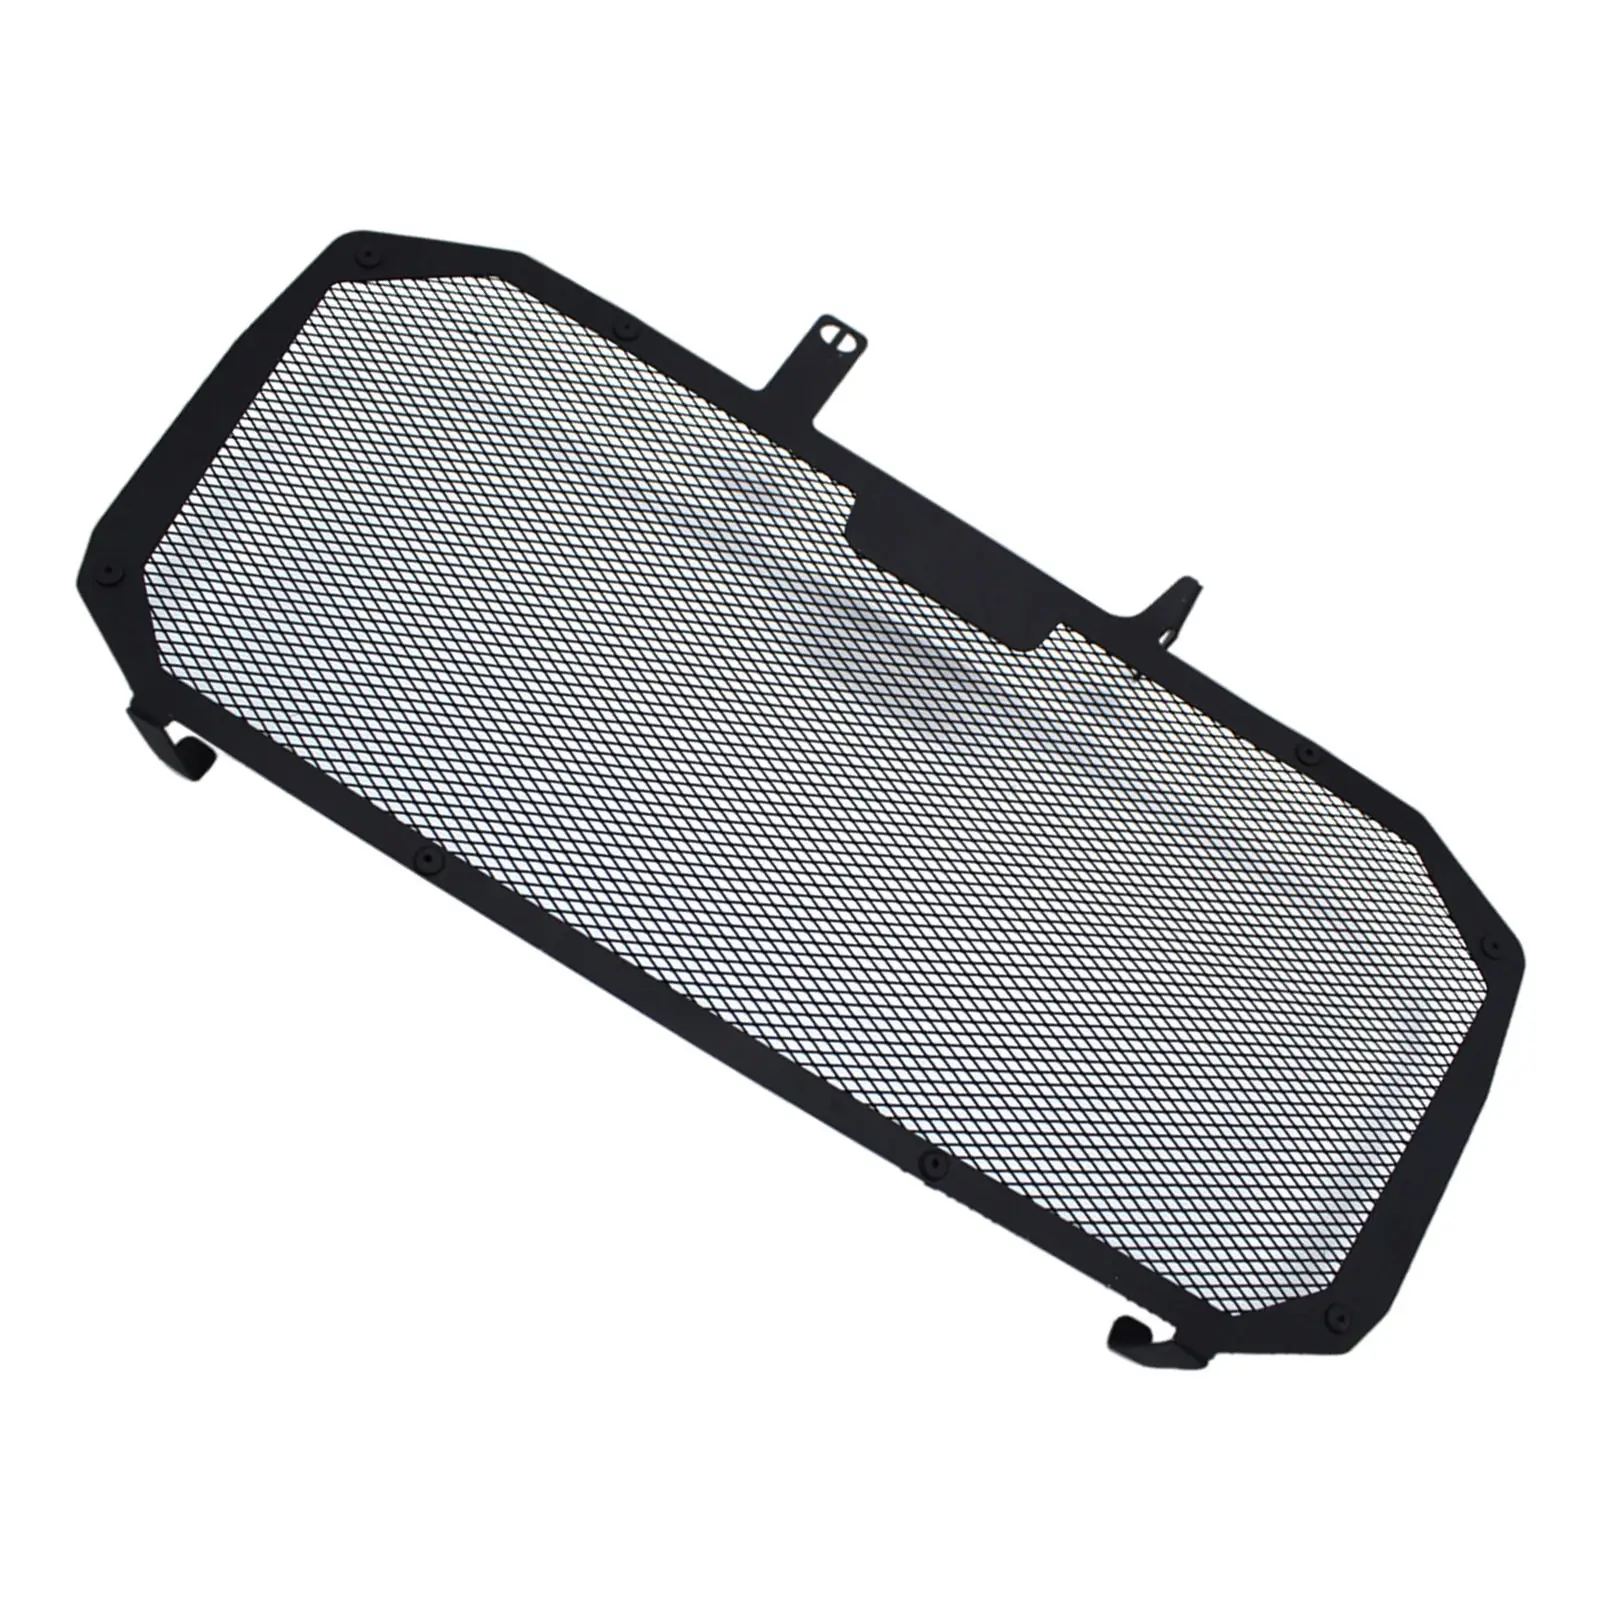 Radiator Grille Guard for HONDA NSS750 Forza750 2020 2021 Accessories Black